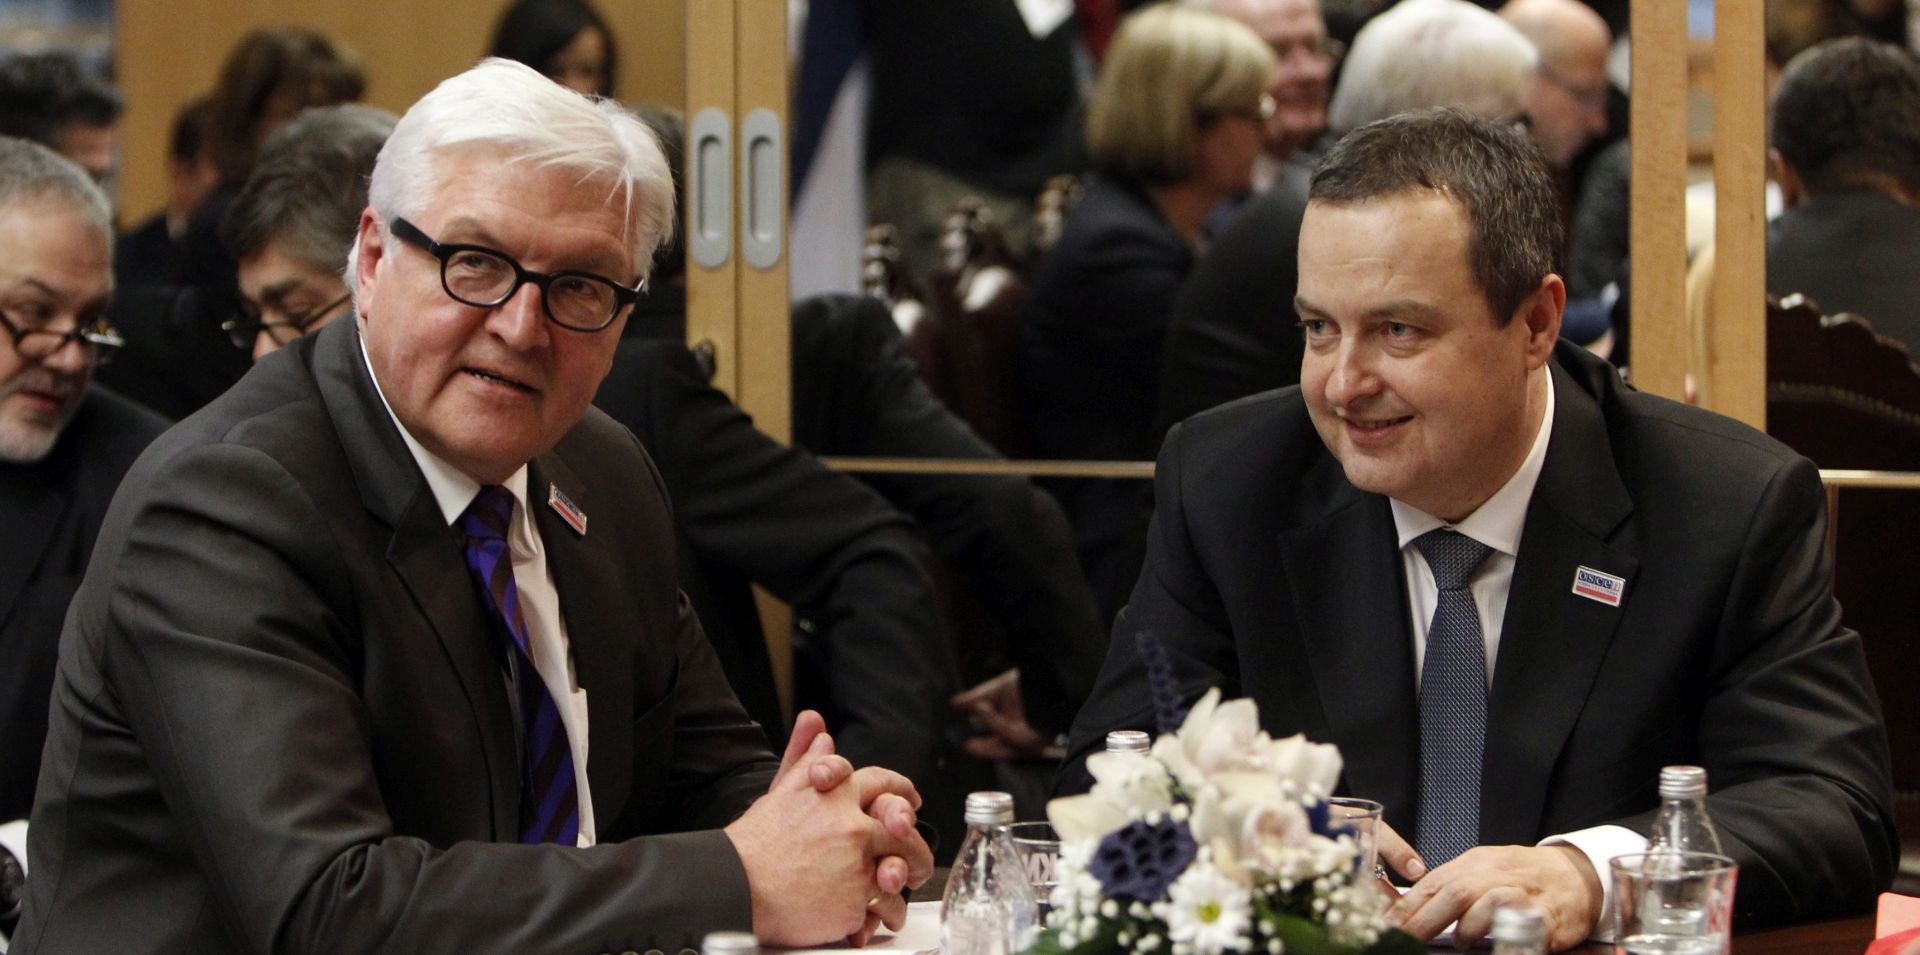 epa05053218 Serbian Foreign Minister Ivica Dacic (R), current Chairman of the Organization for Security and Co-operation in Europe (OSCE), talks with German Foreign Minister Frank-Walter Steinmeier (L), on the sidelines of the 22nd Organization for Security and Co-operation in Europe (OSCE) Ministerial Council in Belgrade, Serbia, 03 December 2015. The Ministerial Council meets once a year towards the end of every term of chairmanship to consider issues on the OSCE agenda and adopt relevant documents, the organization said on its website.  EPA/KOCA SULEJMANOVIC